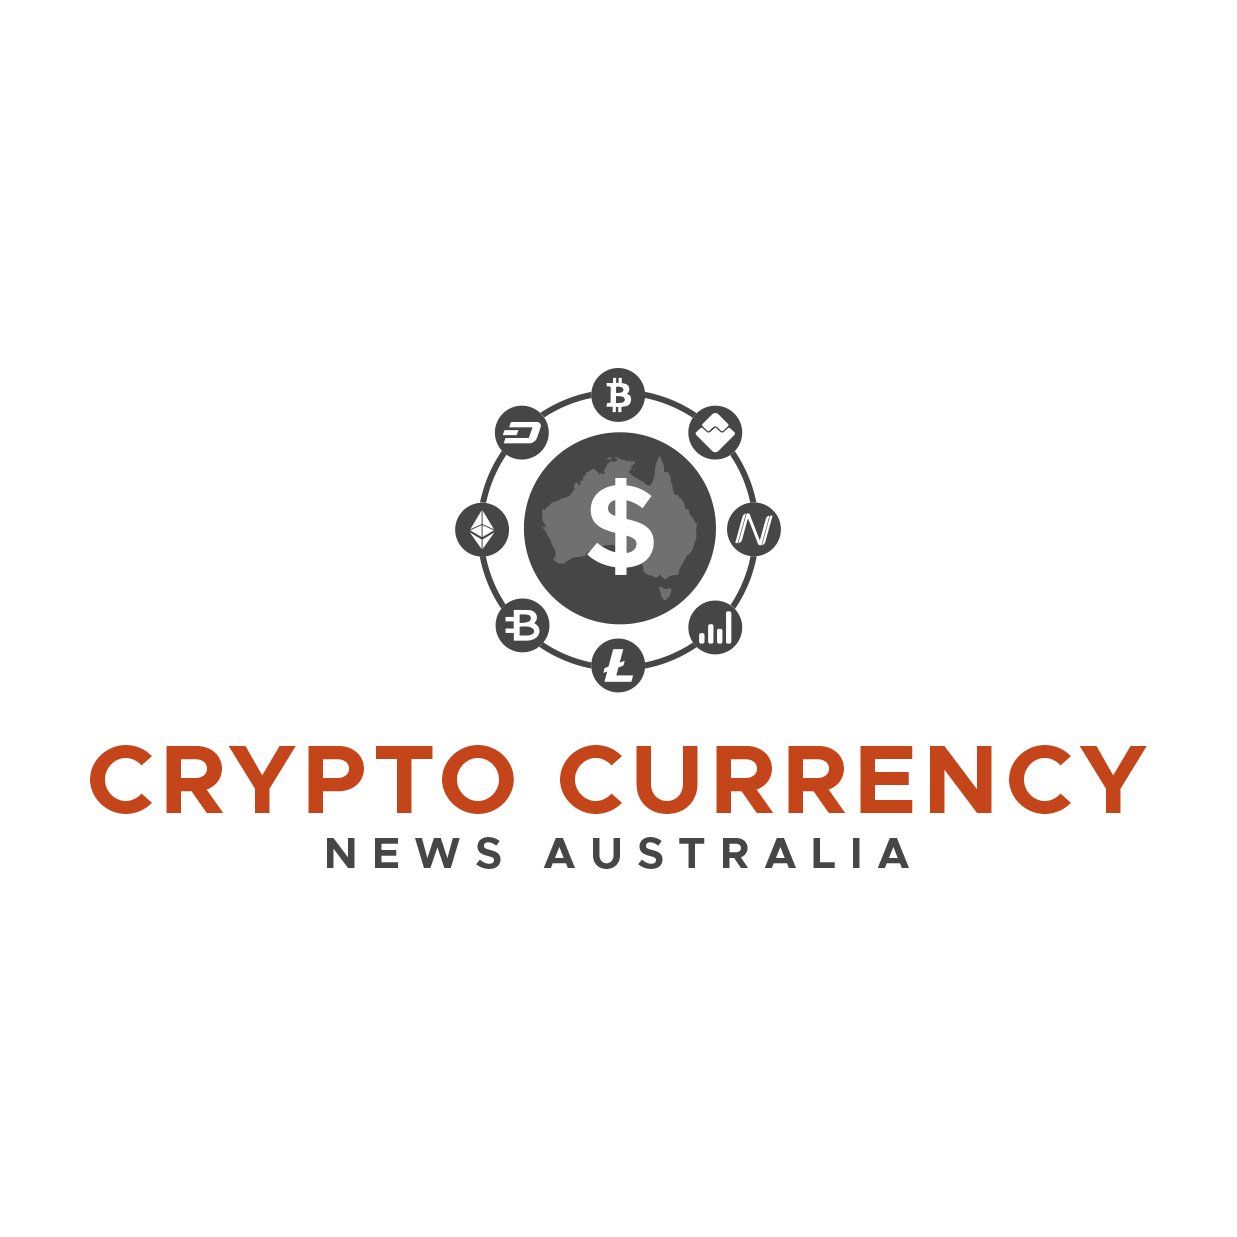 Crypto Currency News Australia - bringing you all the latest news surrounding Crypto Currencies